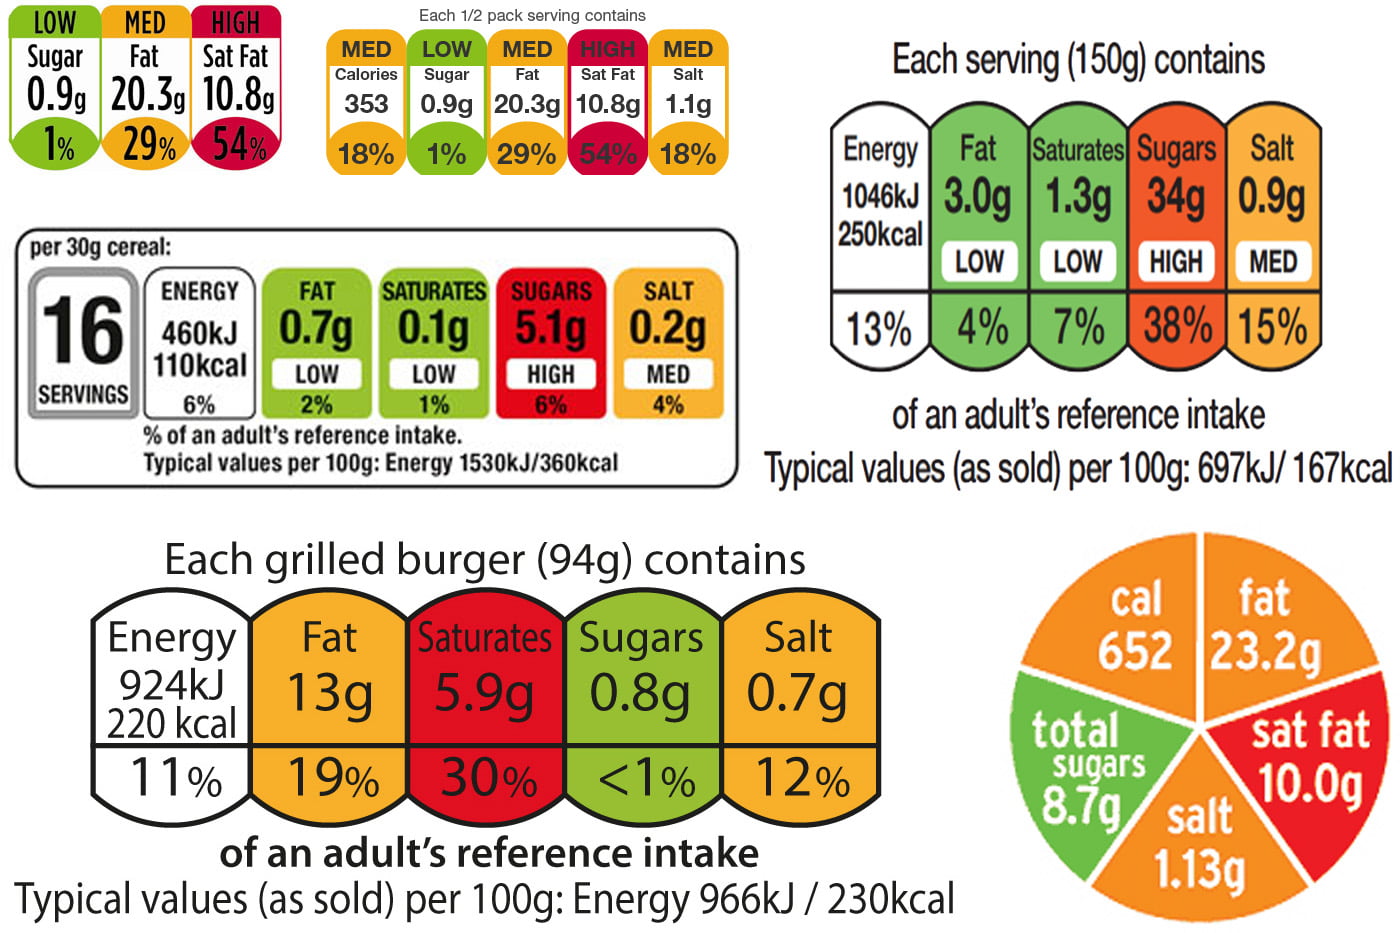 Here's Why We Need to be Reading Nutrition Labels Way More Carefully